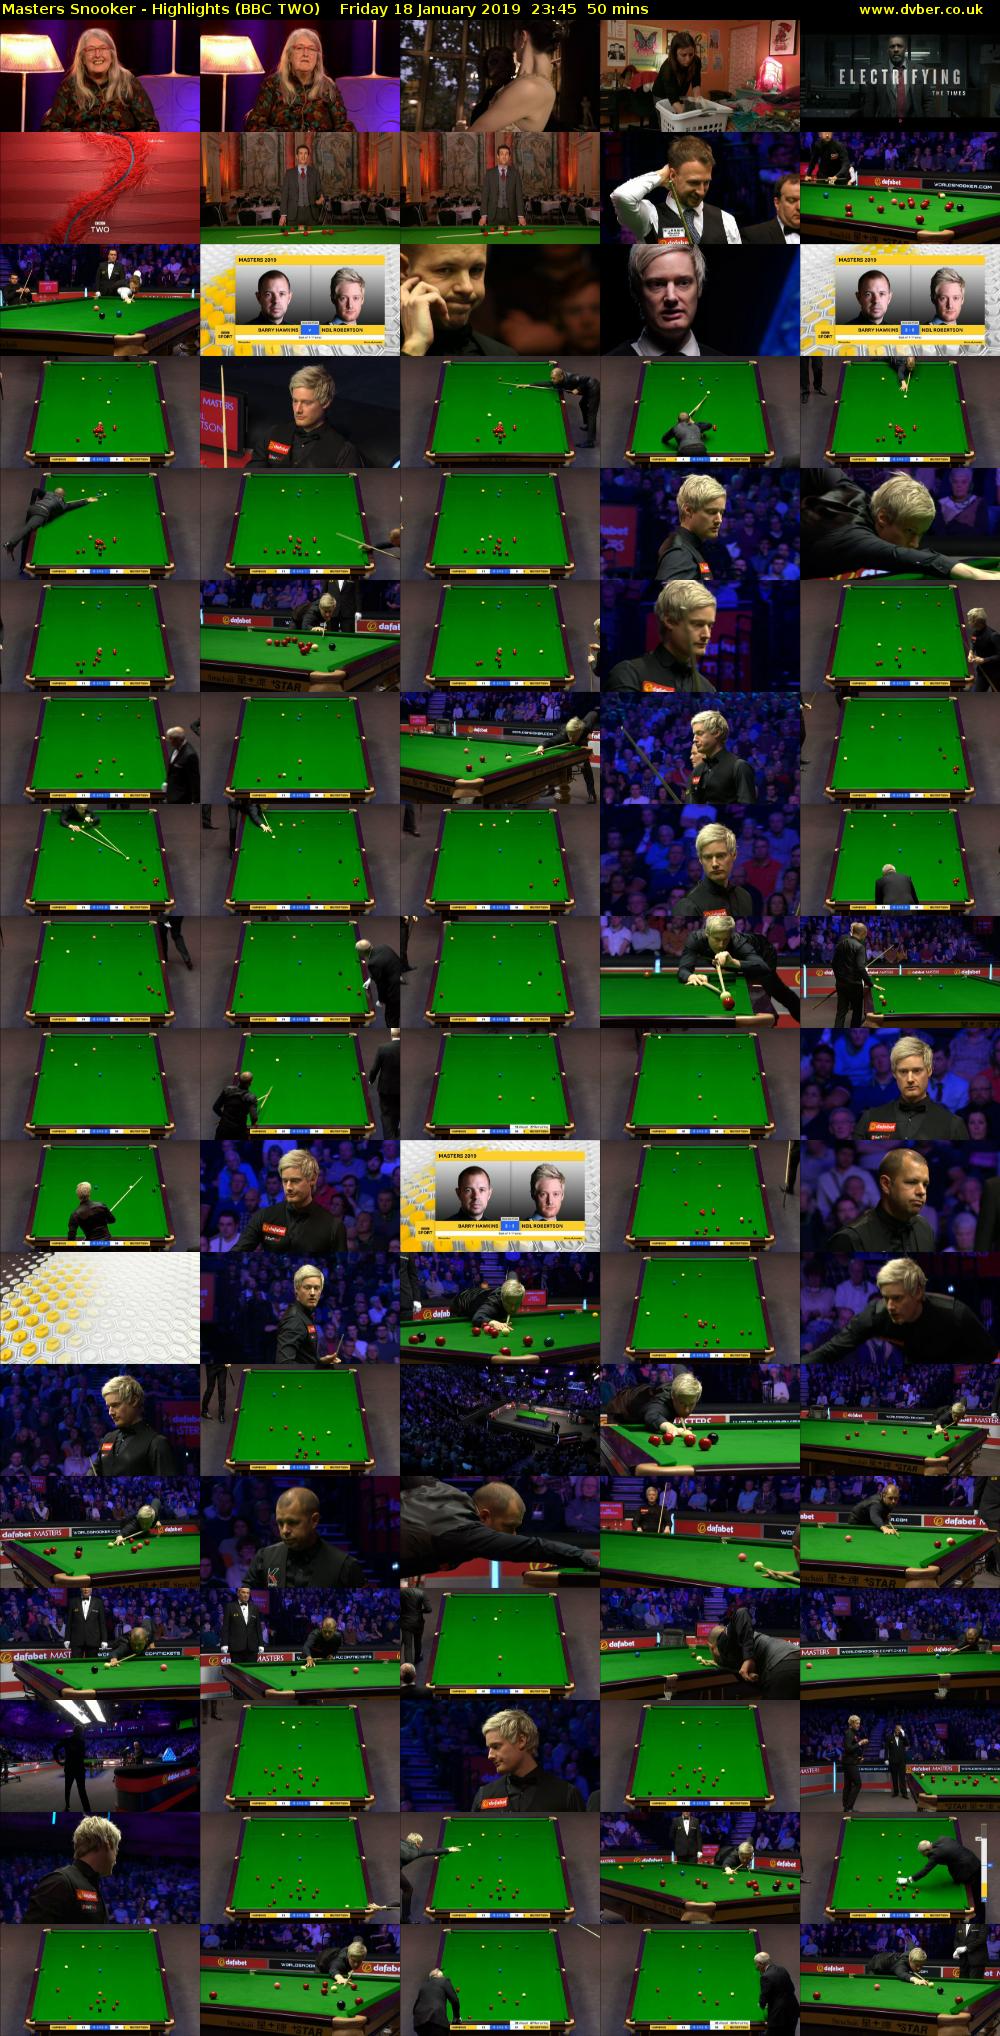 Masters Snooker - Highlights (BBC TWO) Friday 18 January 2019 23:45 - 00:35